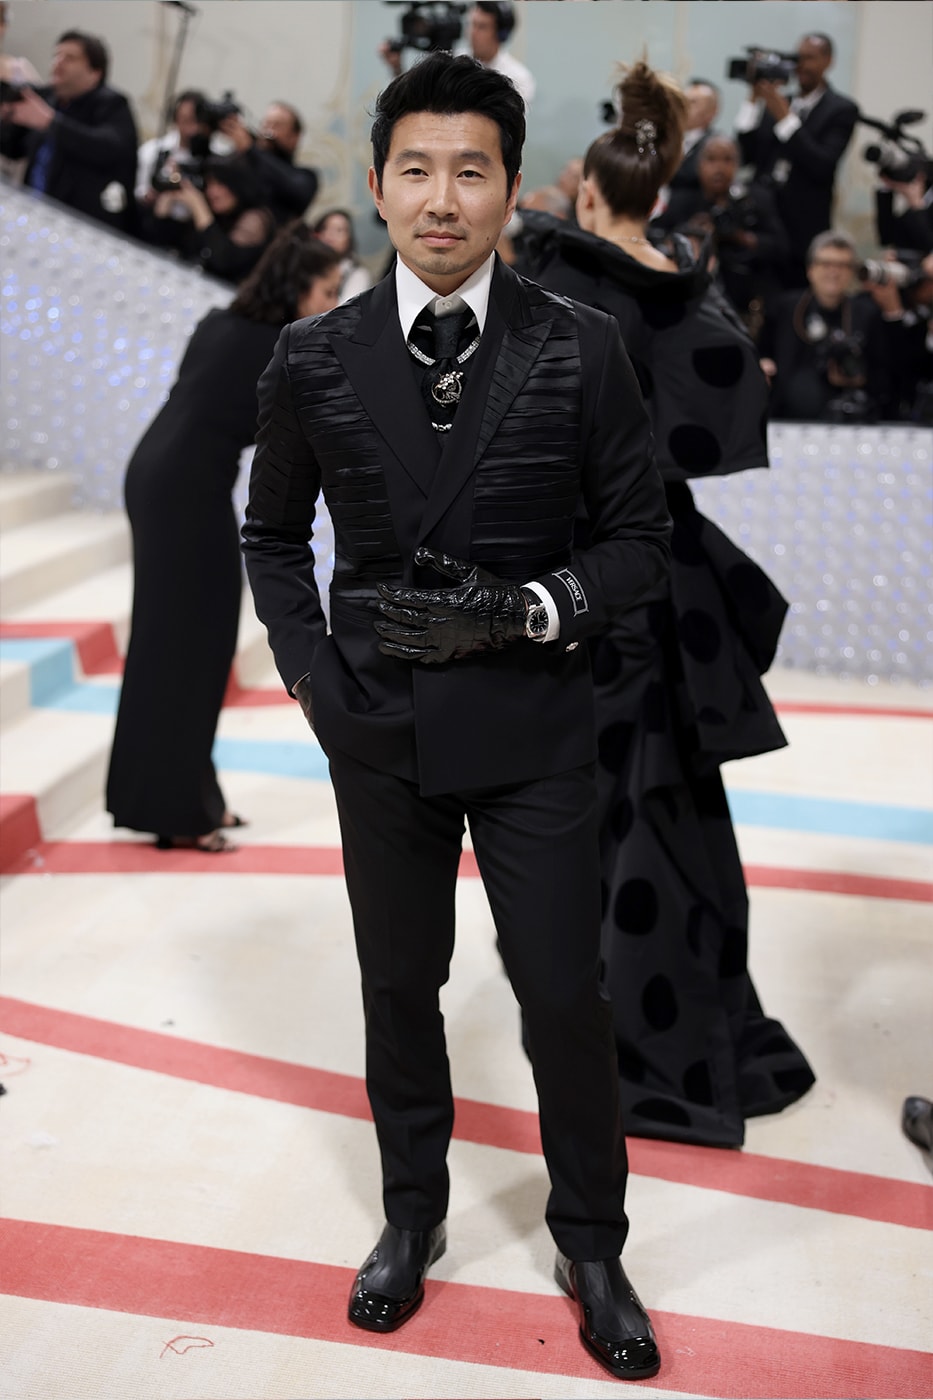 Most Talked About Moments at Met Gala 2023 Karl Lagerfeld: A Line of Beauty biggest fits jared leto lil nas x cardi b simu liu choupette fendi chanel nicole kidman key huay quan michelle yeoh lilly collins bad bunny kendall jenner kylie jenner